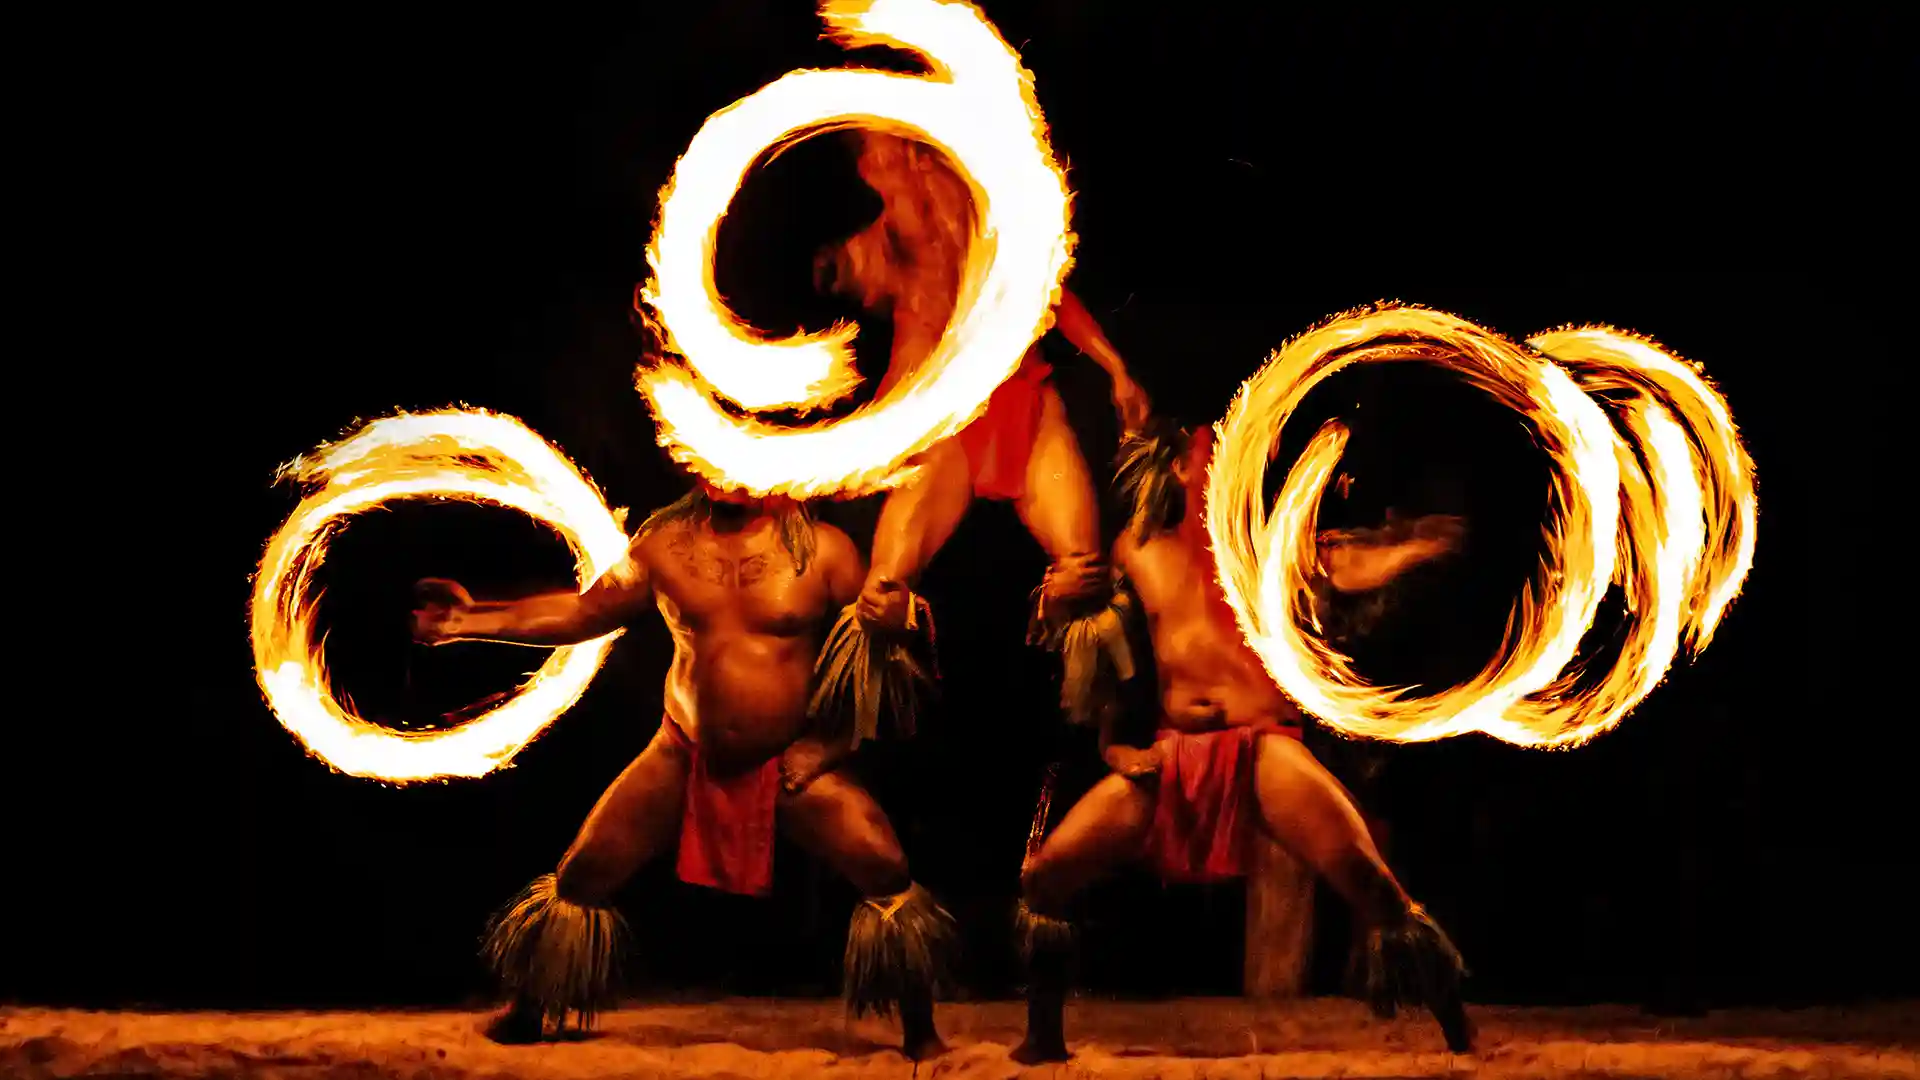 View of performers at a luau with rings of fire.